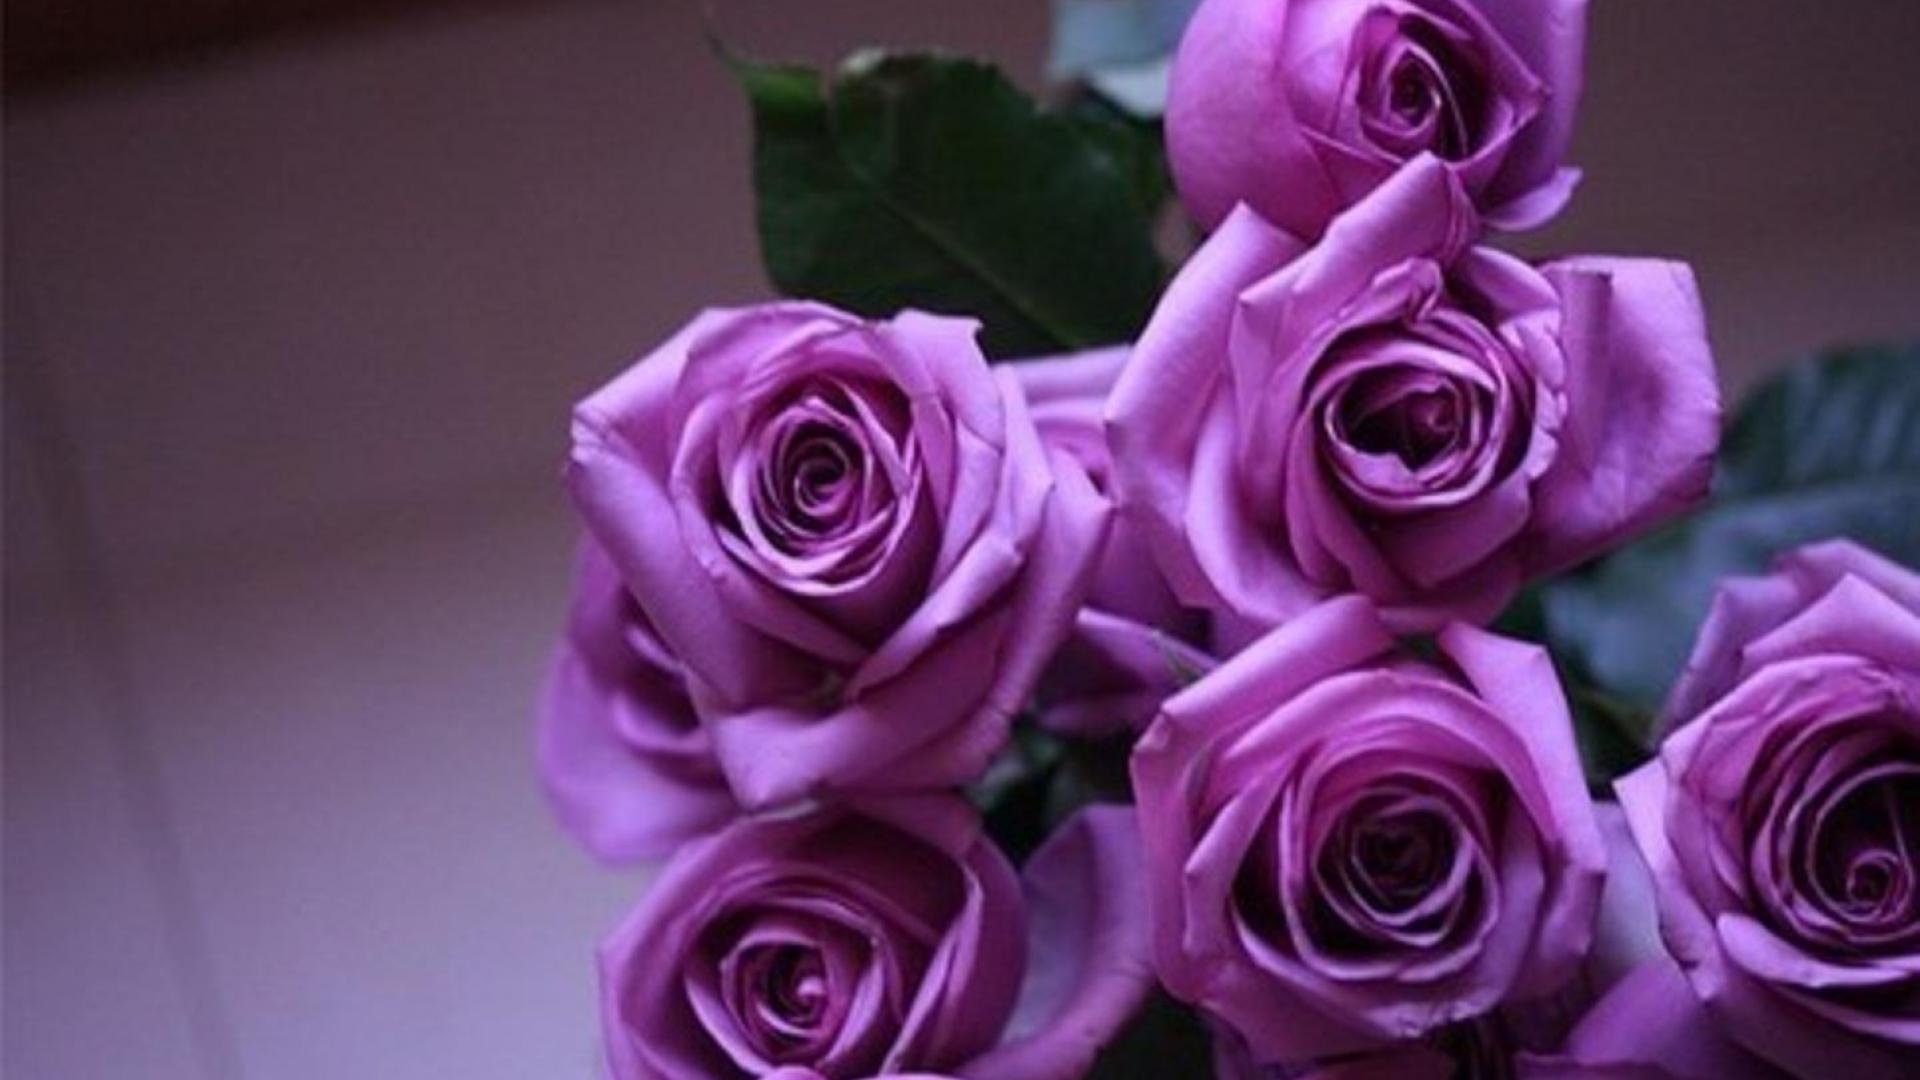 Purple Roses Wallpaper High Definition Quality